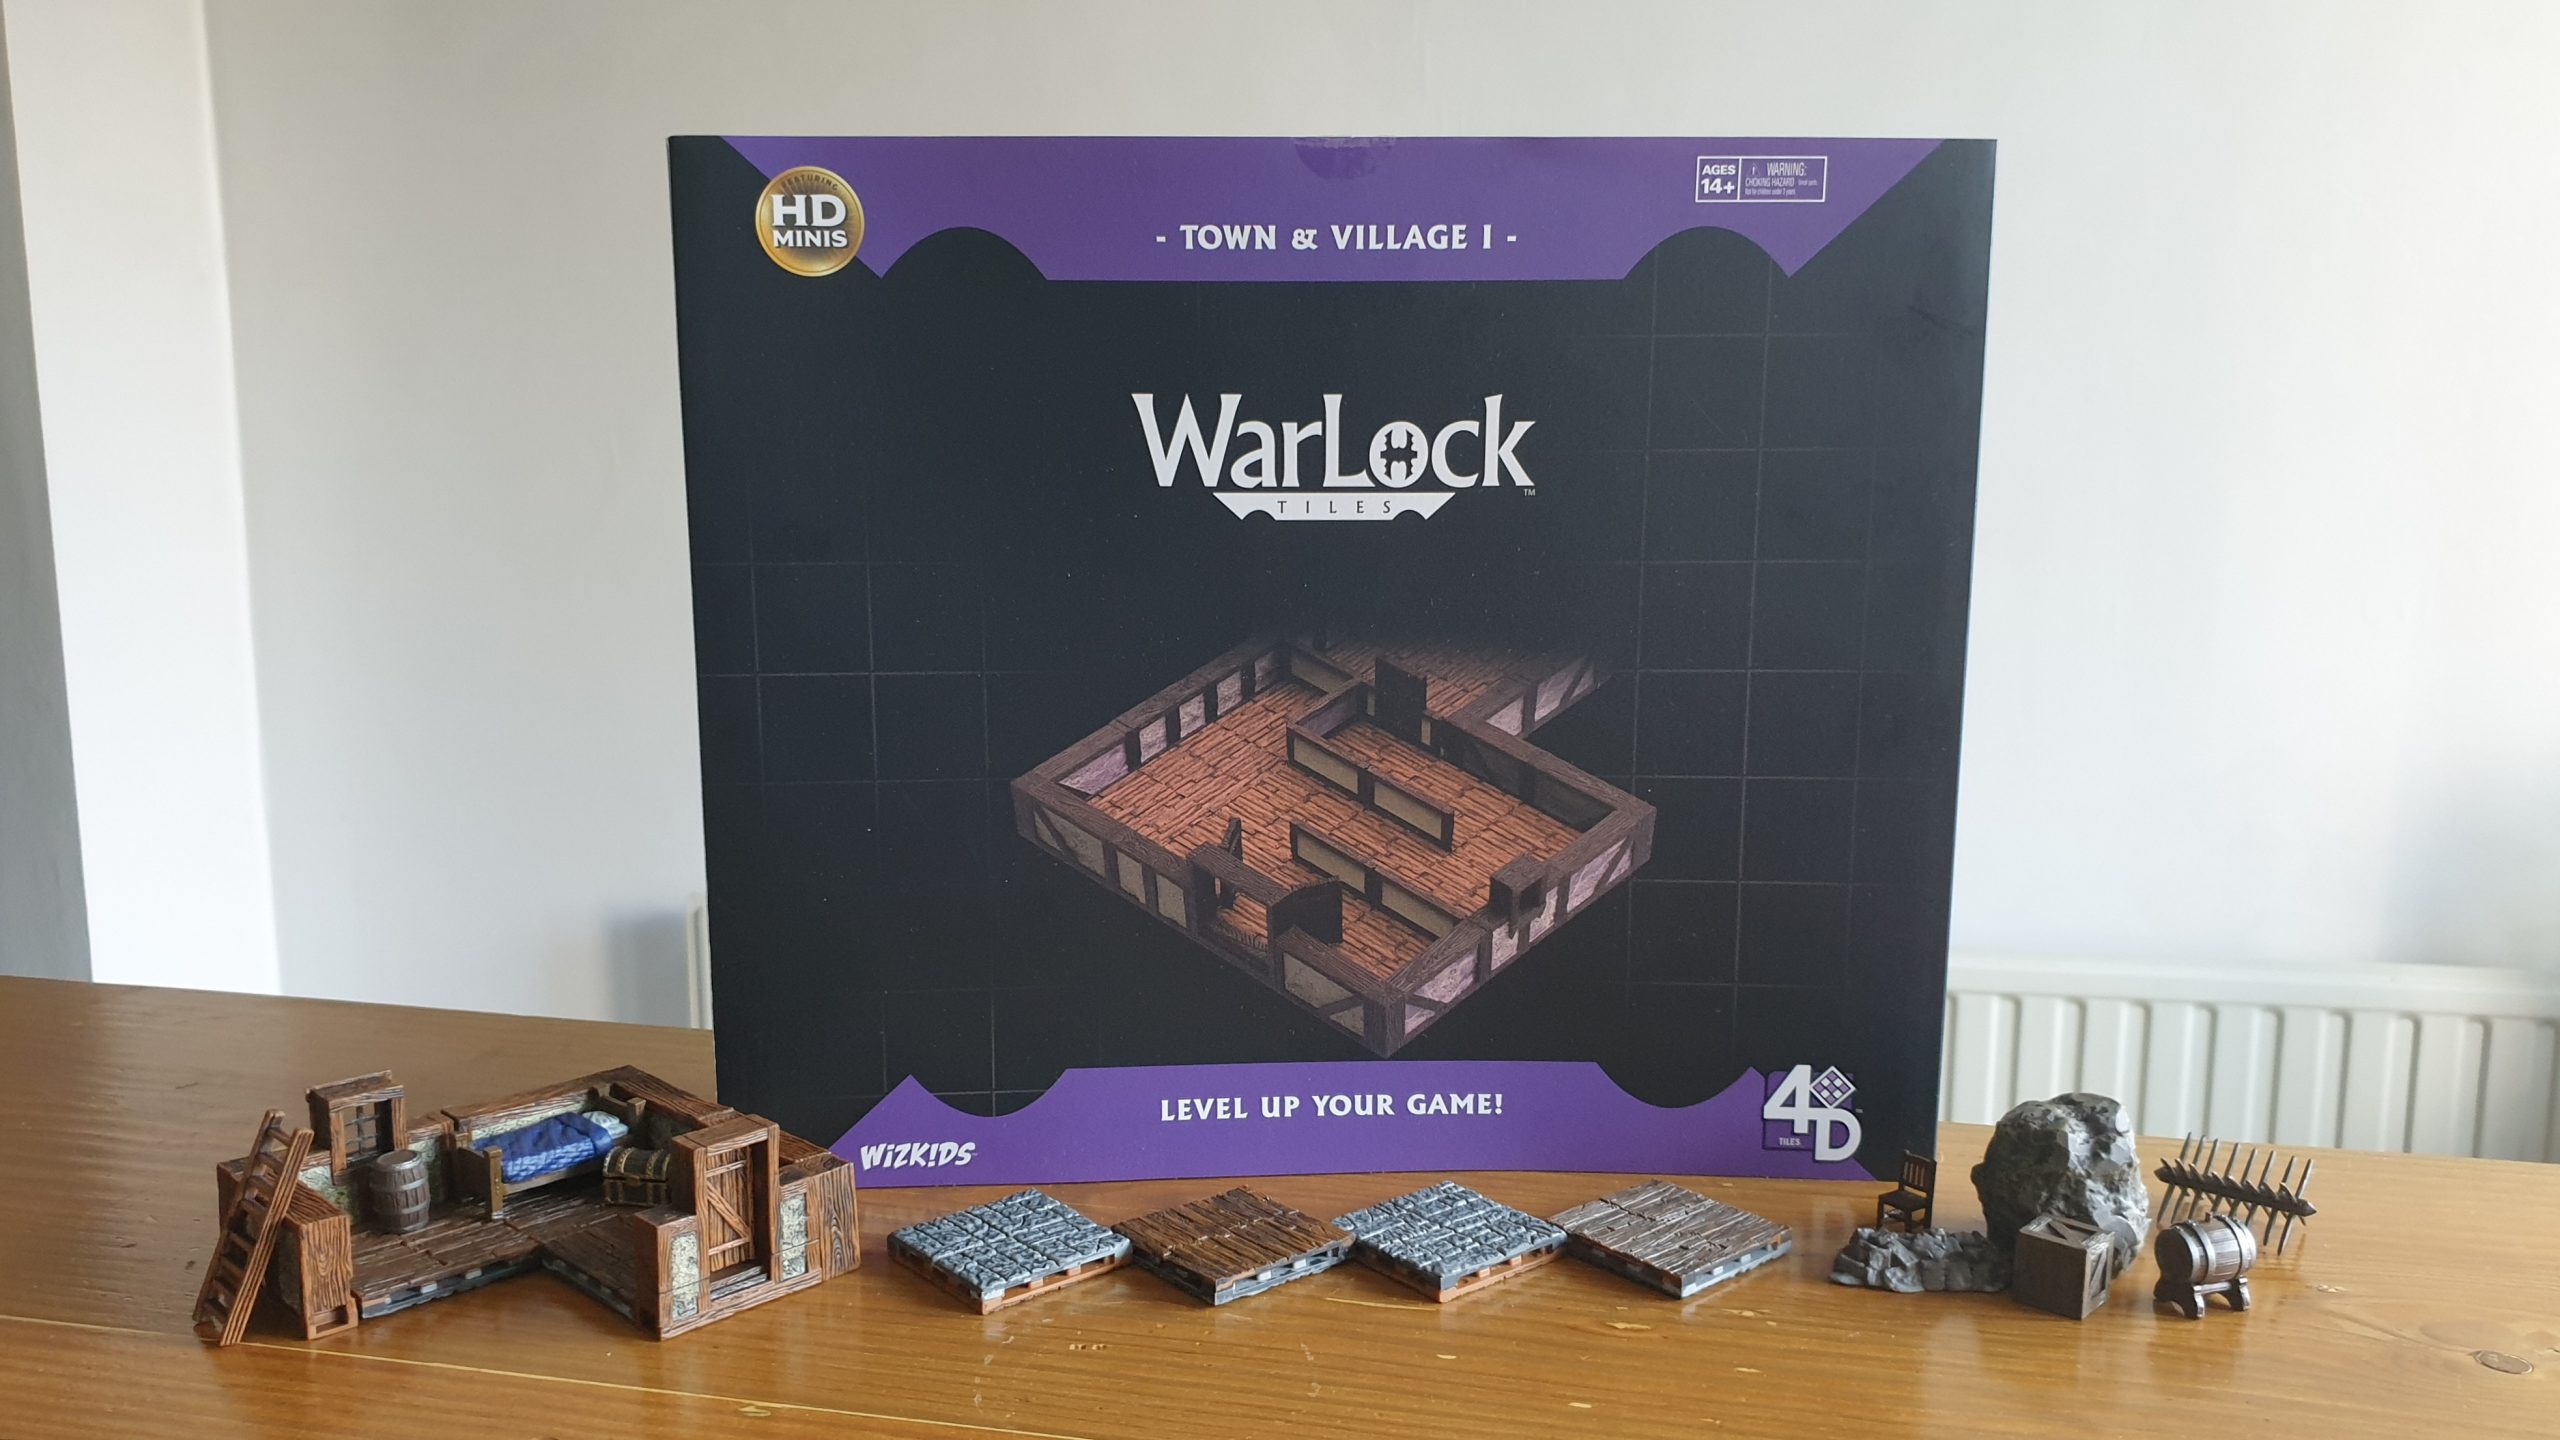 WarLock Tiles Review – “Level-Up Your Game”